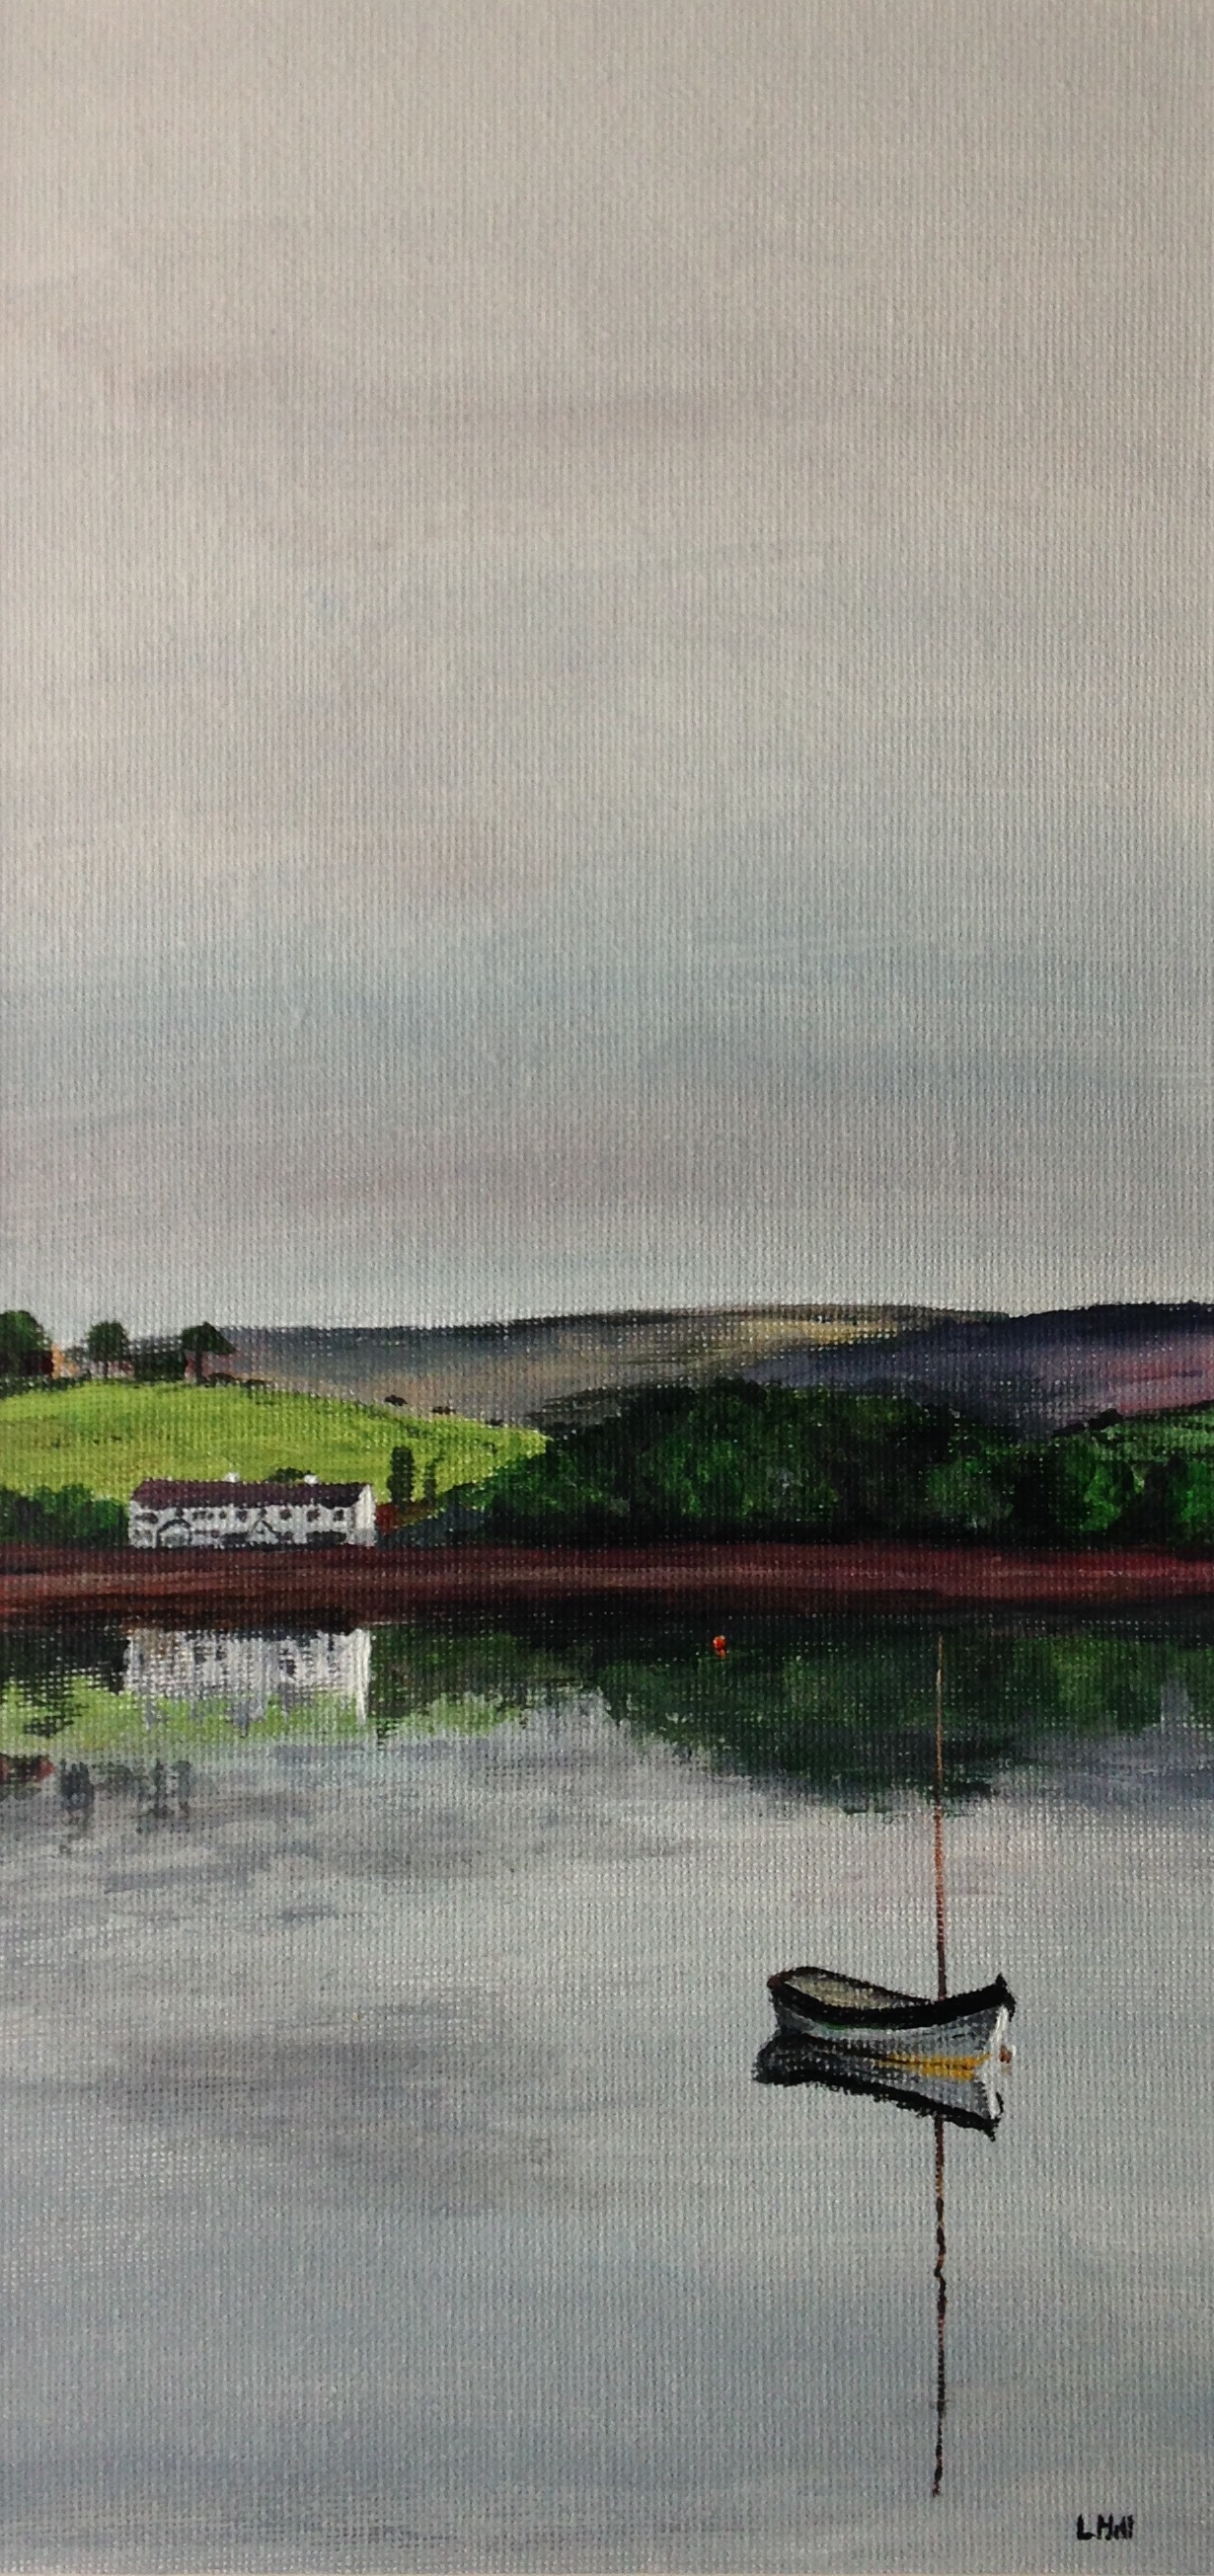 Boat on Hollingworth Lake acrylic painting by Louisa Hill